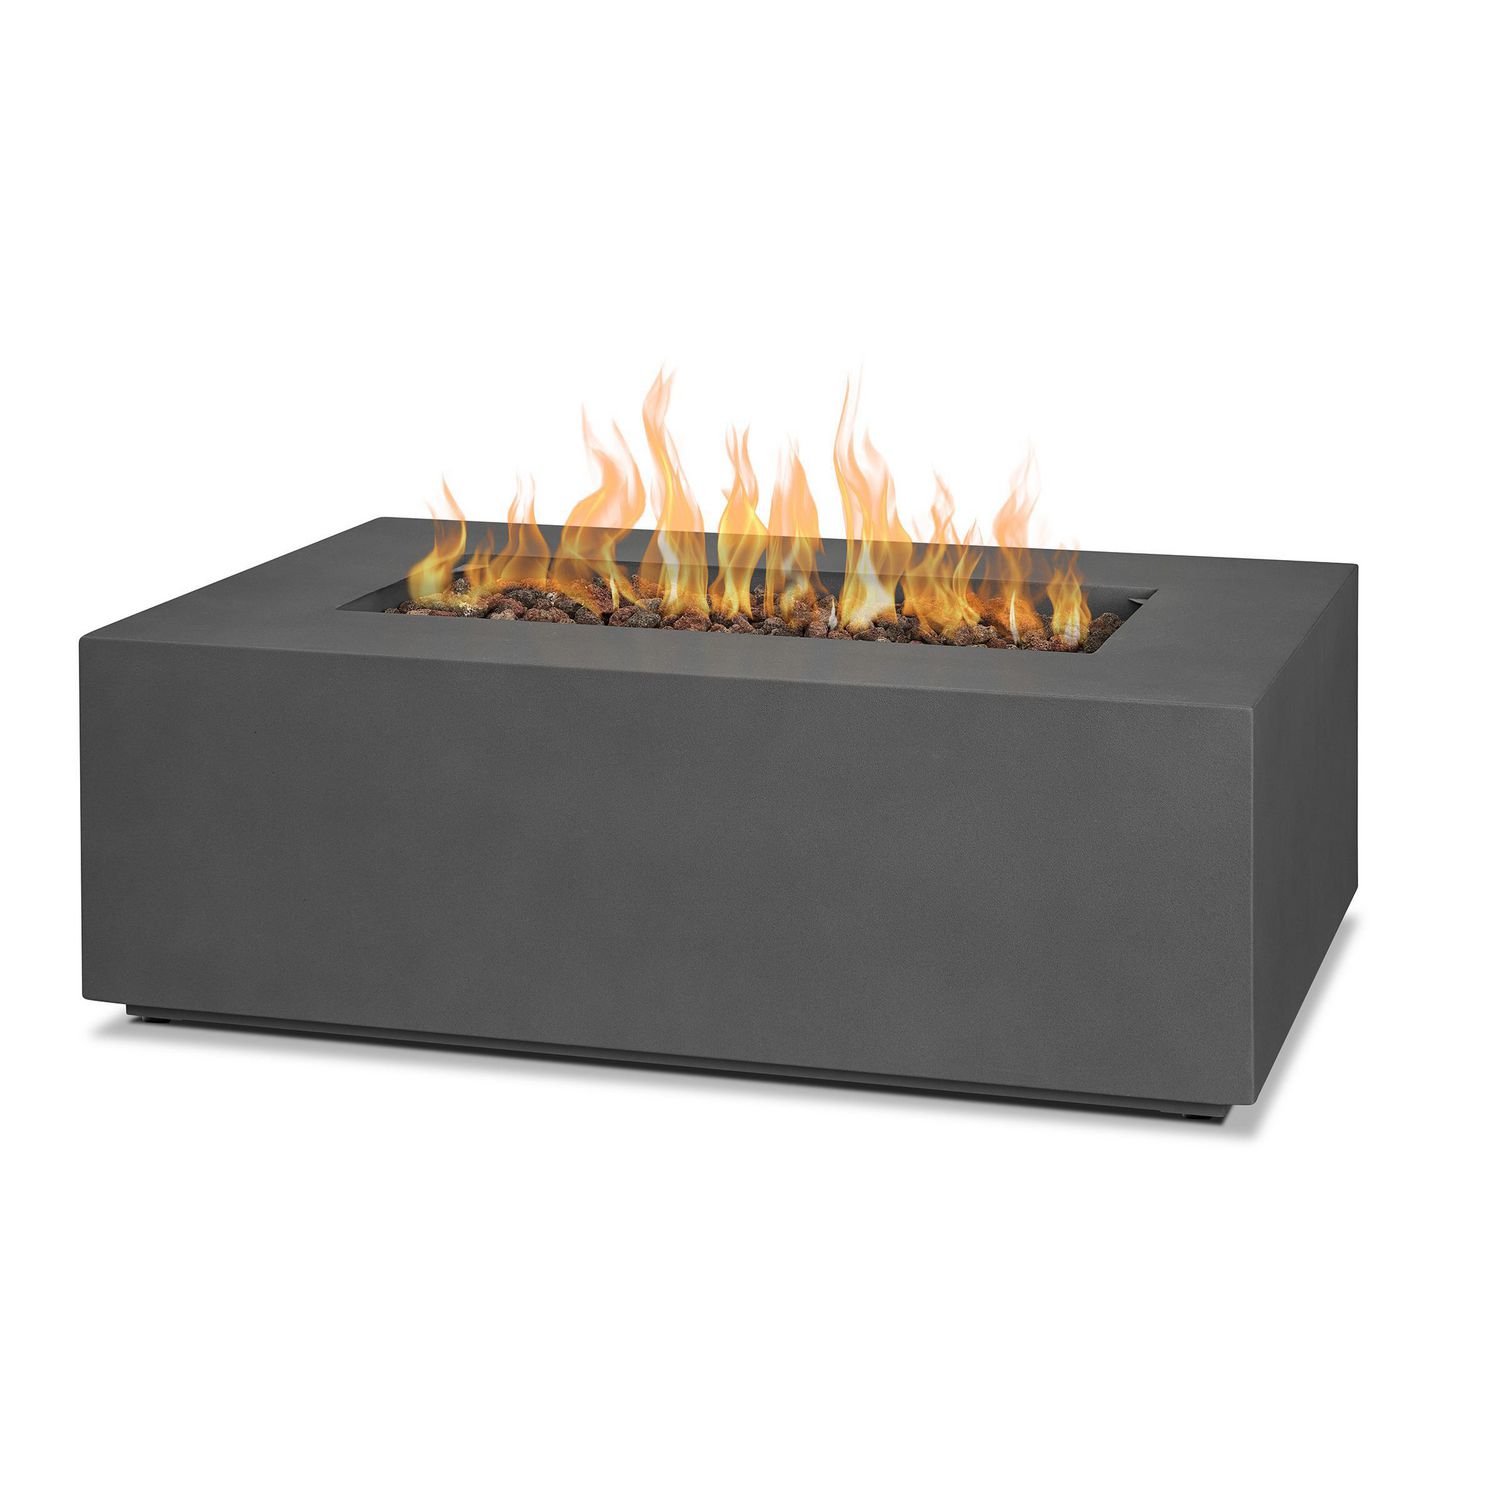 Aegean Small Rectangle Propane Gas Fire, How To Convert Propane To Natural Gas Fire Pit